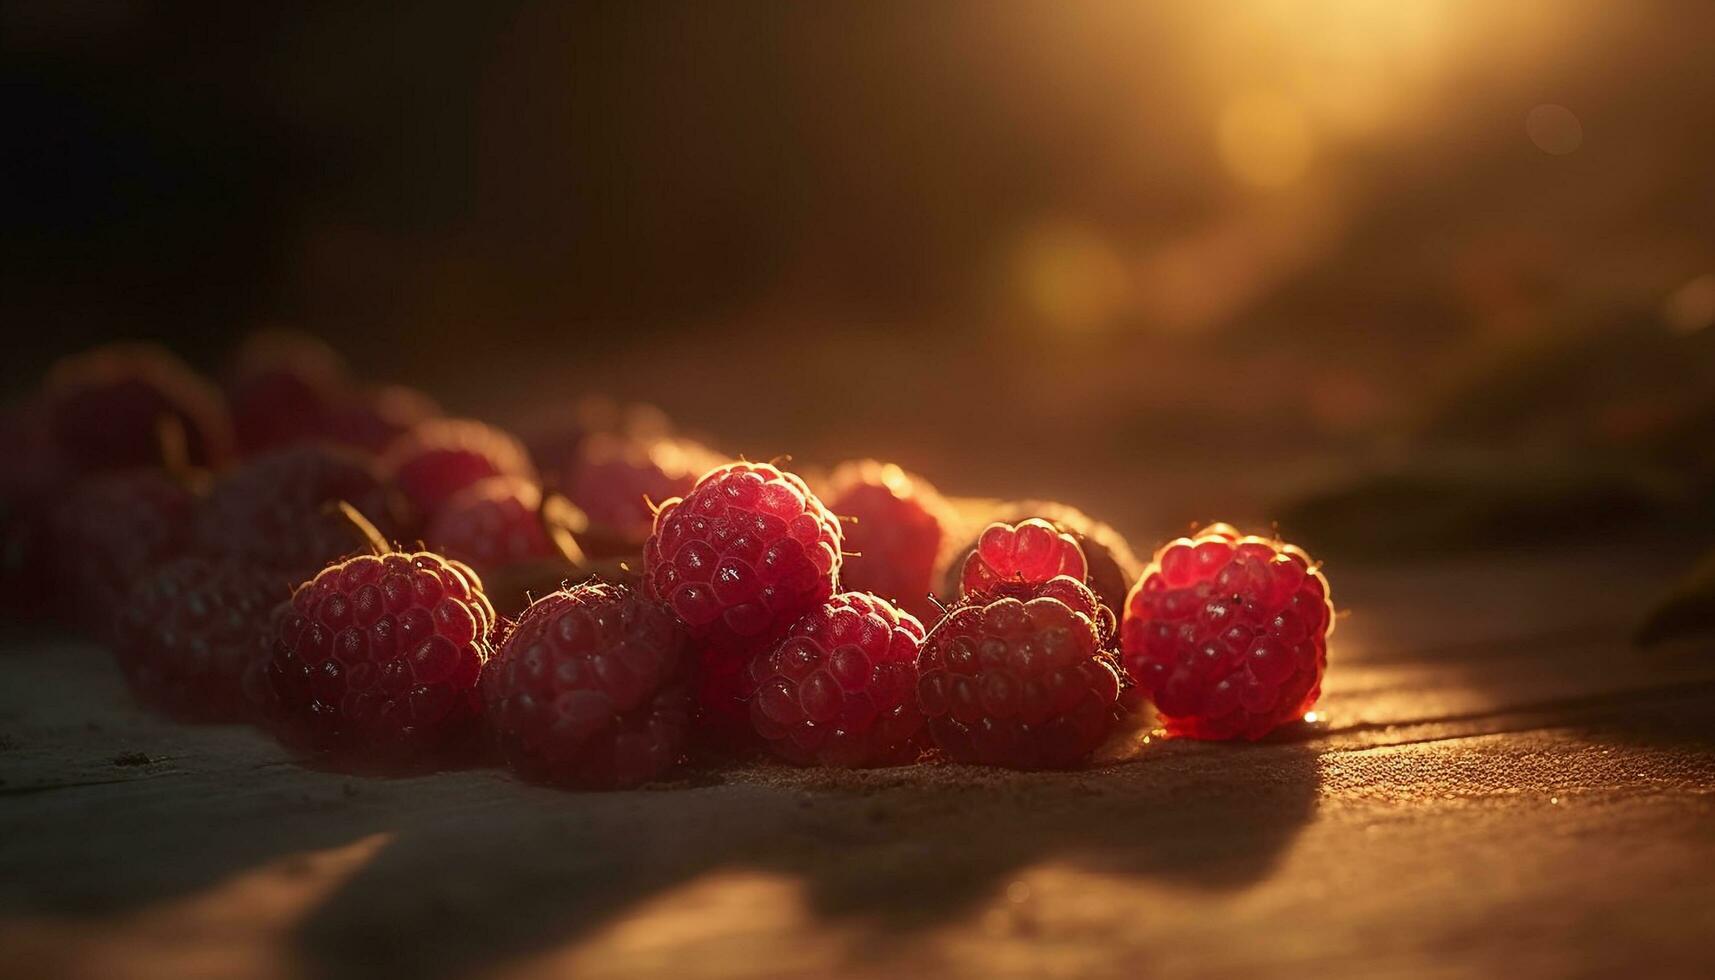 Raspberry fruit, freshness, ripe nature, healthy eating, summer organic dessert generated by AI photo